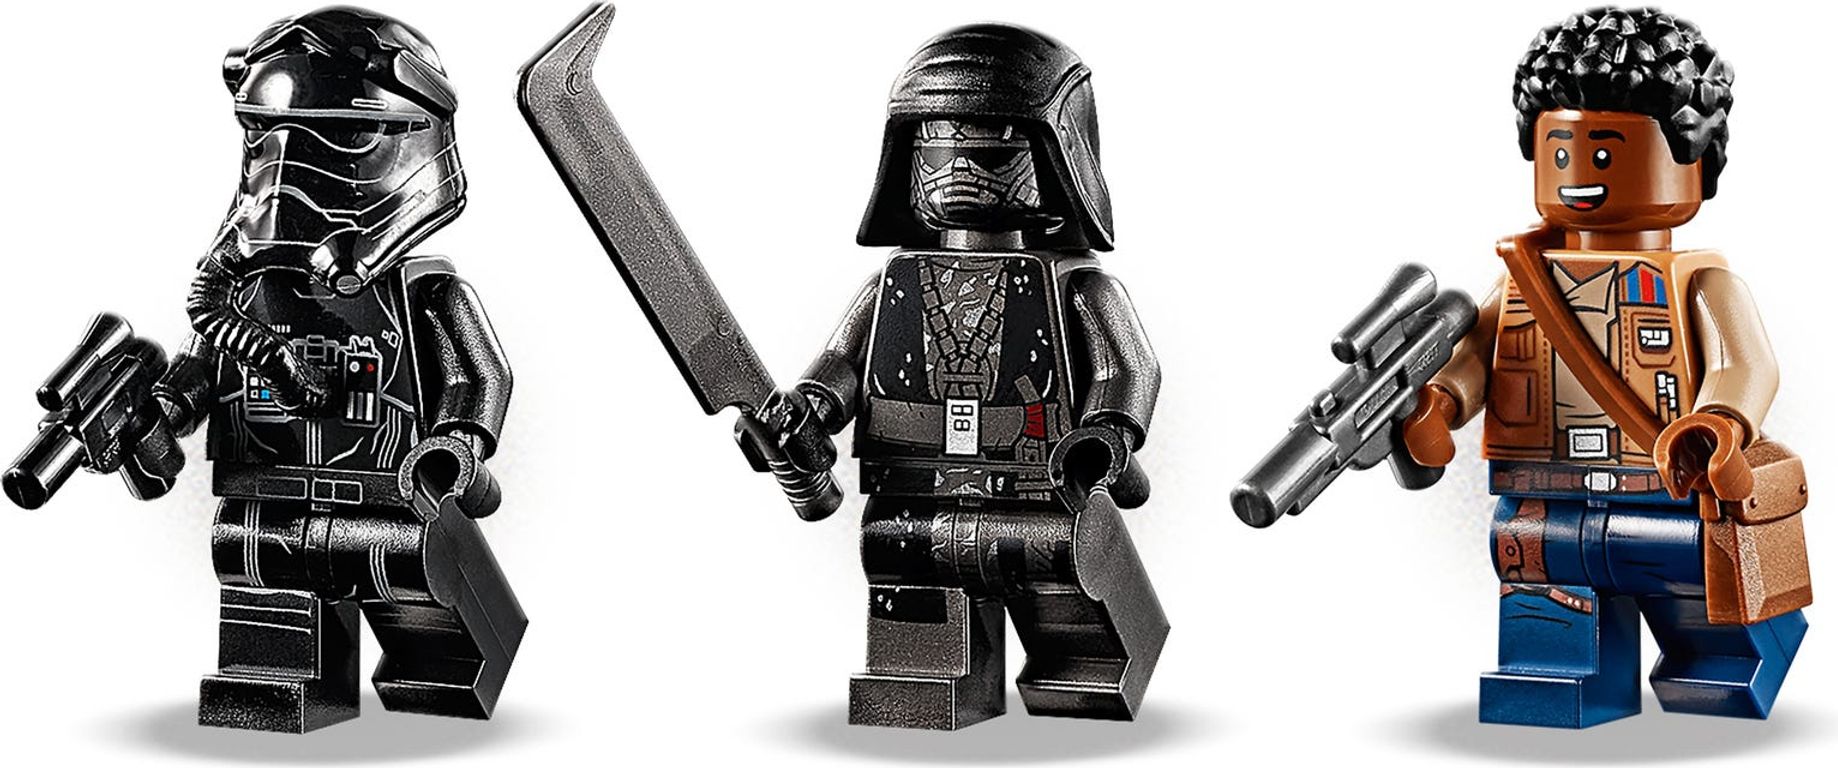 LEGO® Star Wars Sith TIE Fighter™ minifigures